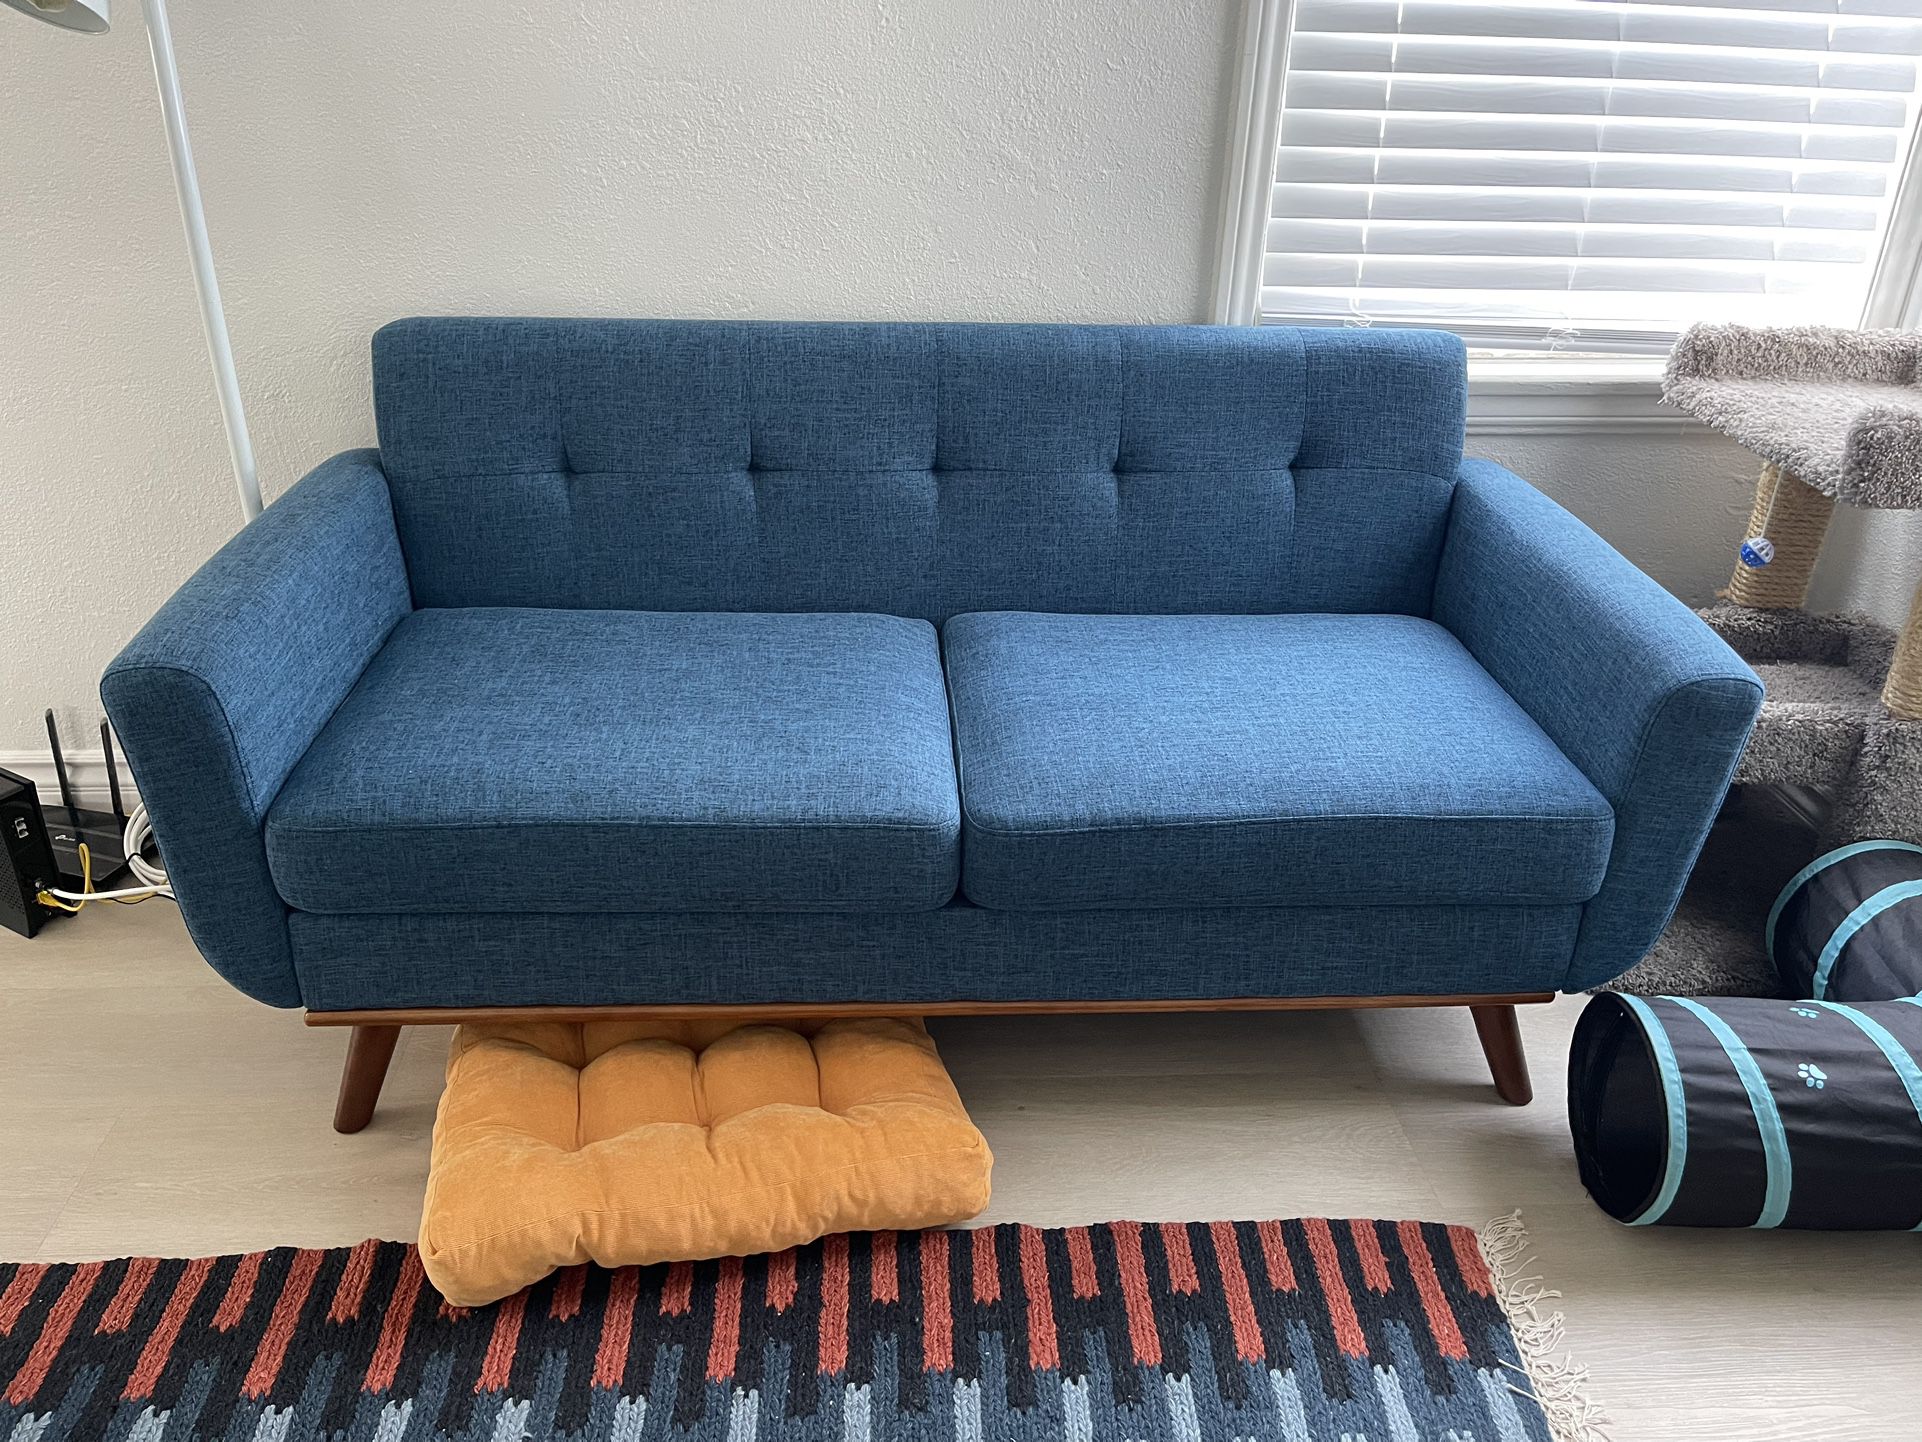 Small Love Seat Sofa/Couch